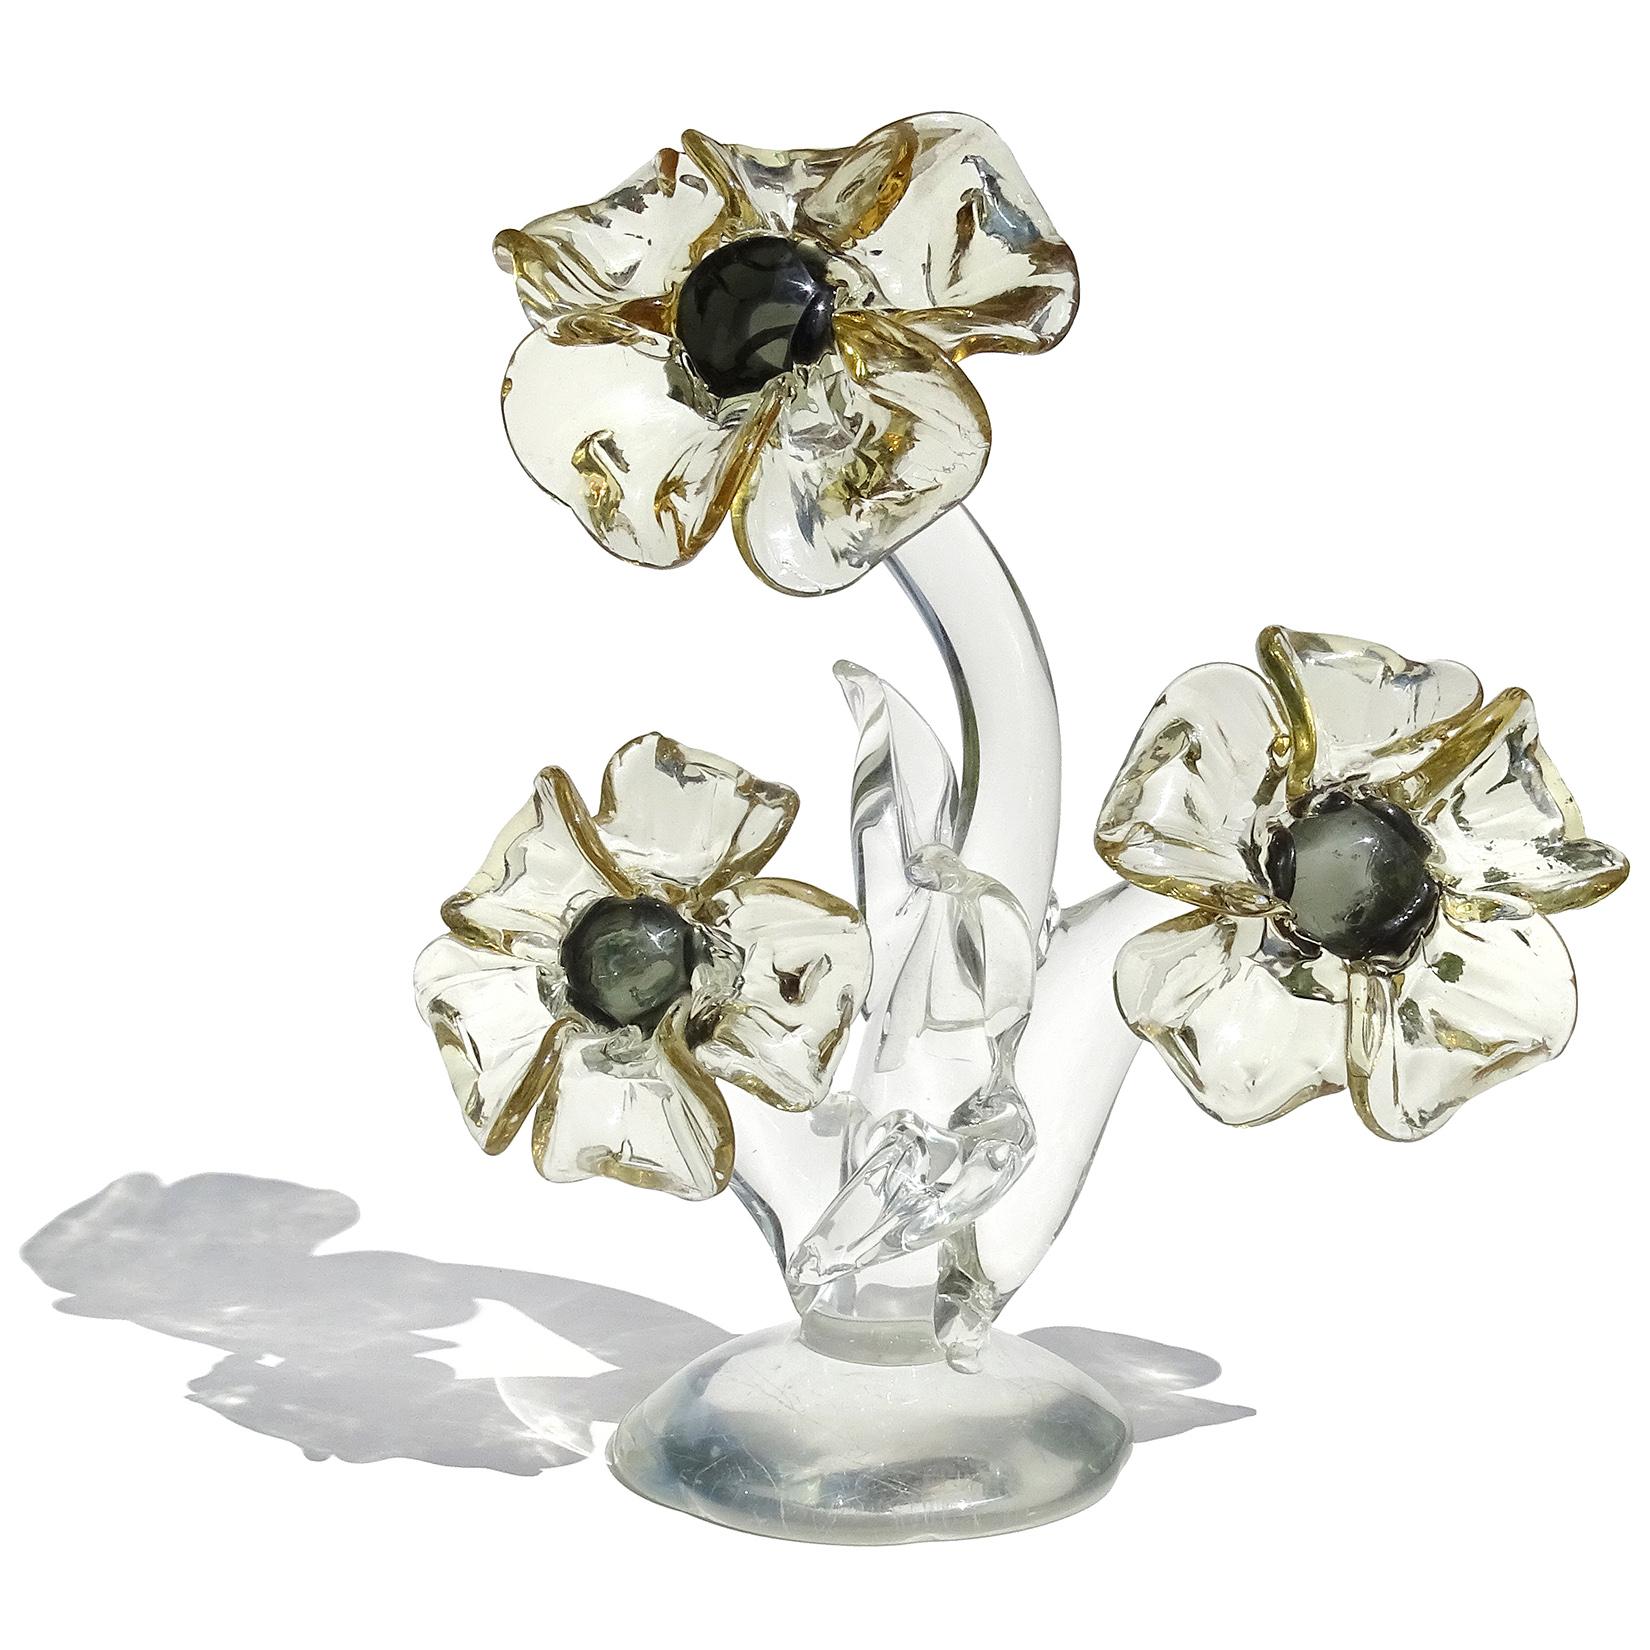 Beautiful large vintage Murano hand blown Italian art glass flowering plant sculpture. The piece has 3 very large flowers with clear leafs and base. Created with some Neodymium glass, which changes color from daylight to indoor fluorescent lighting.